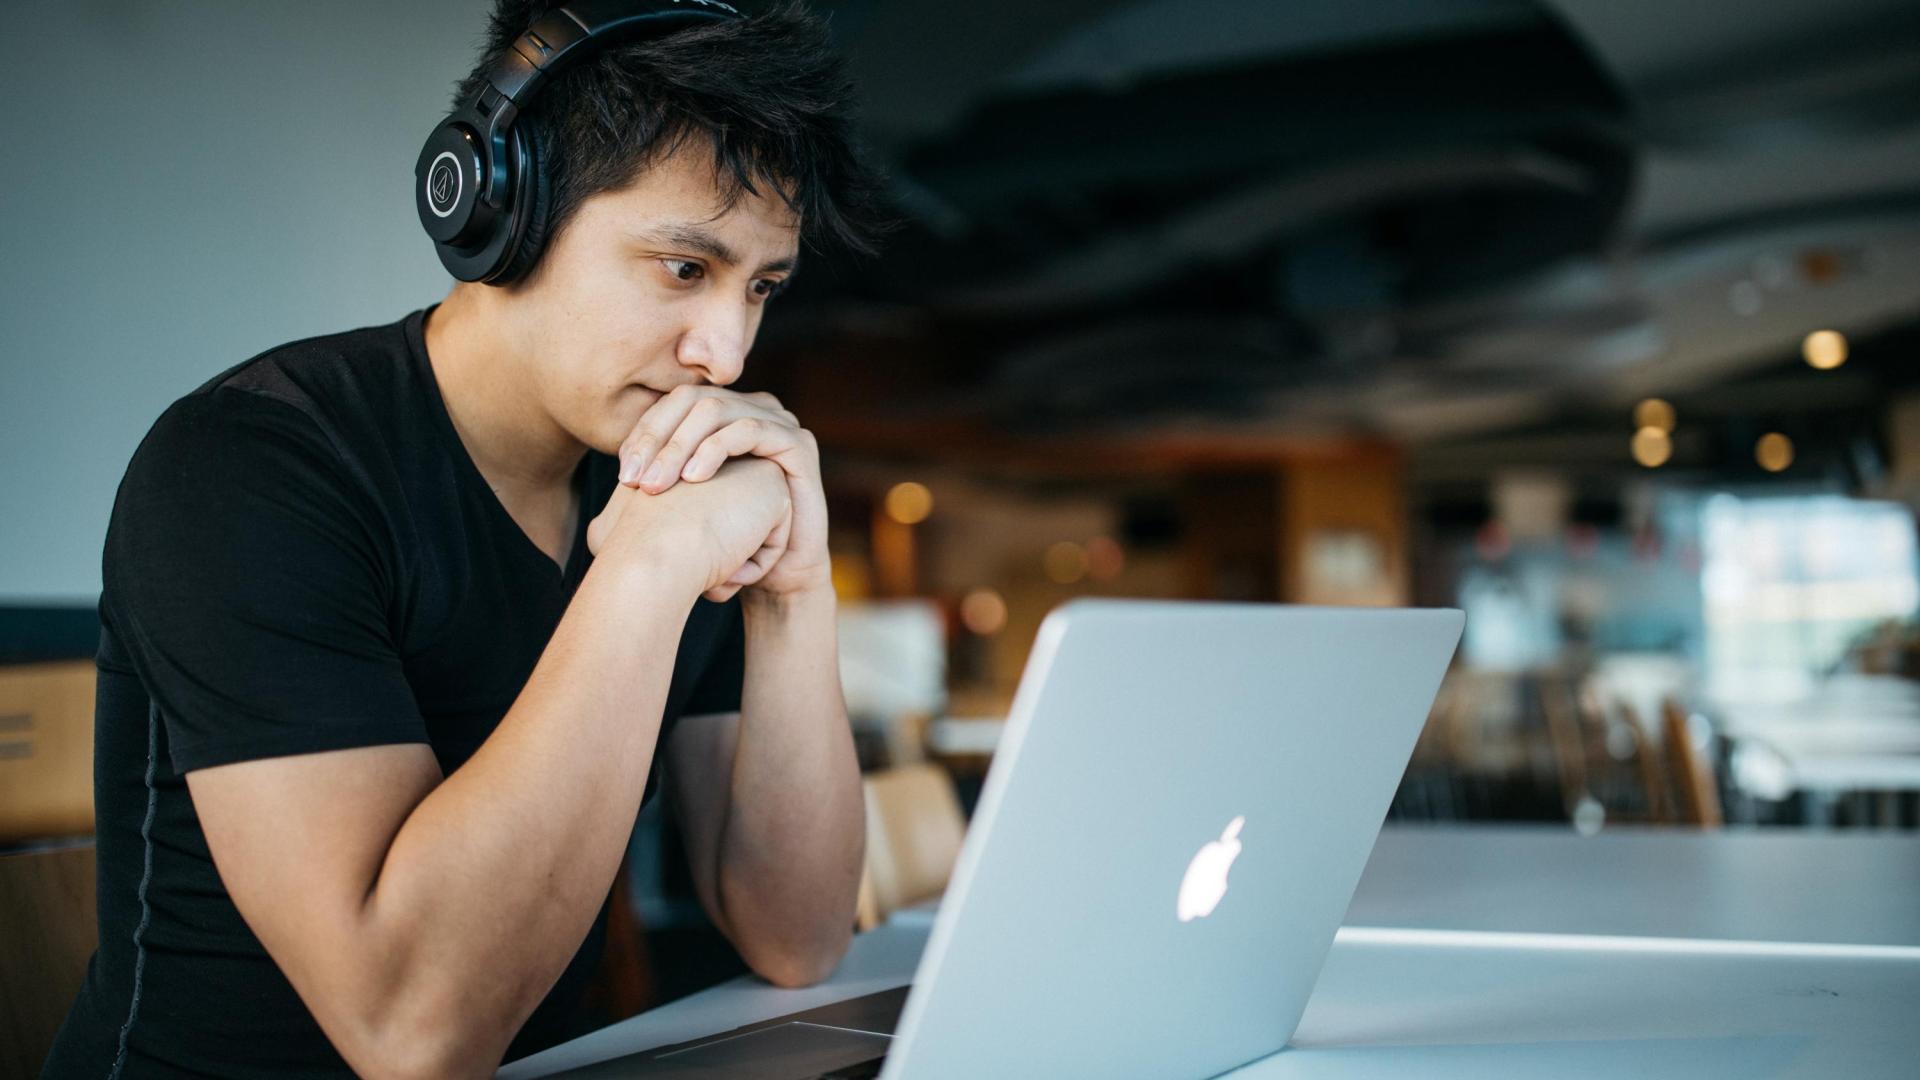 A man sitting in front of a laptop with earphones on.